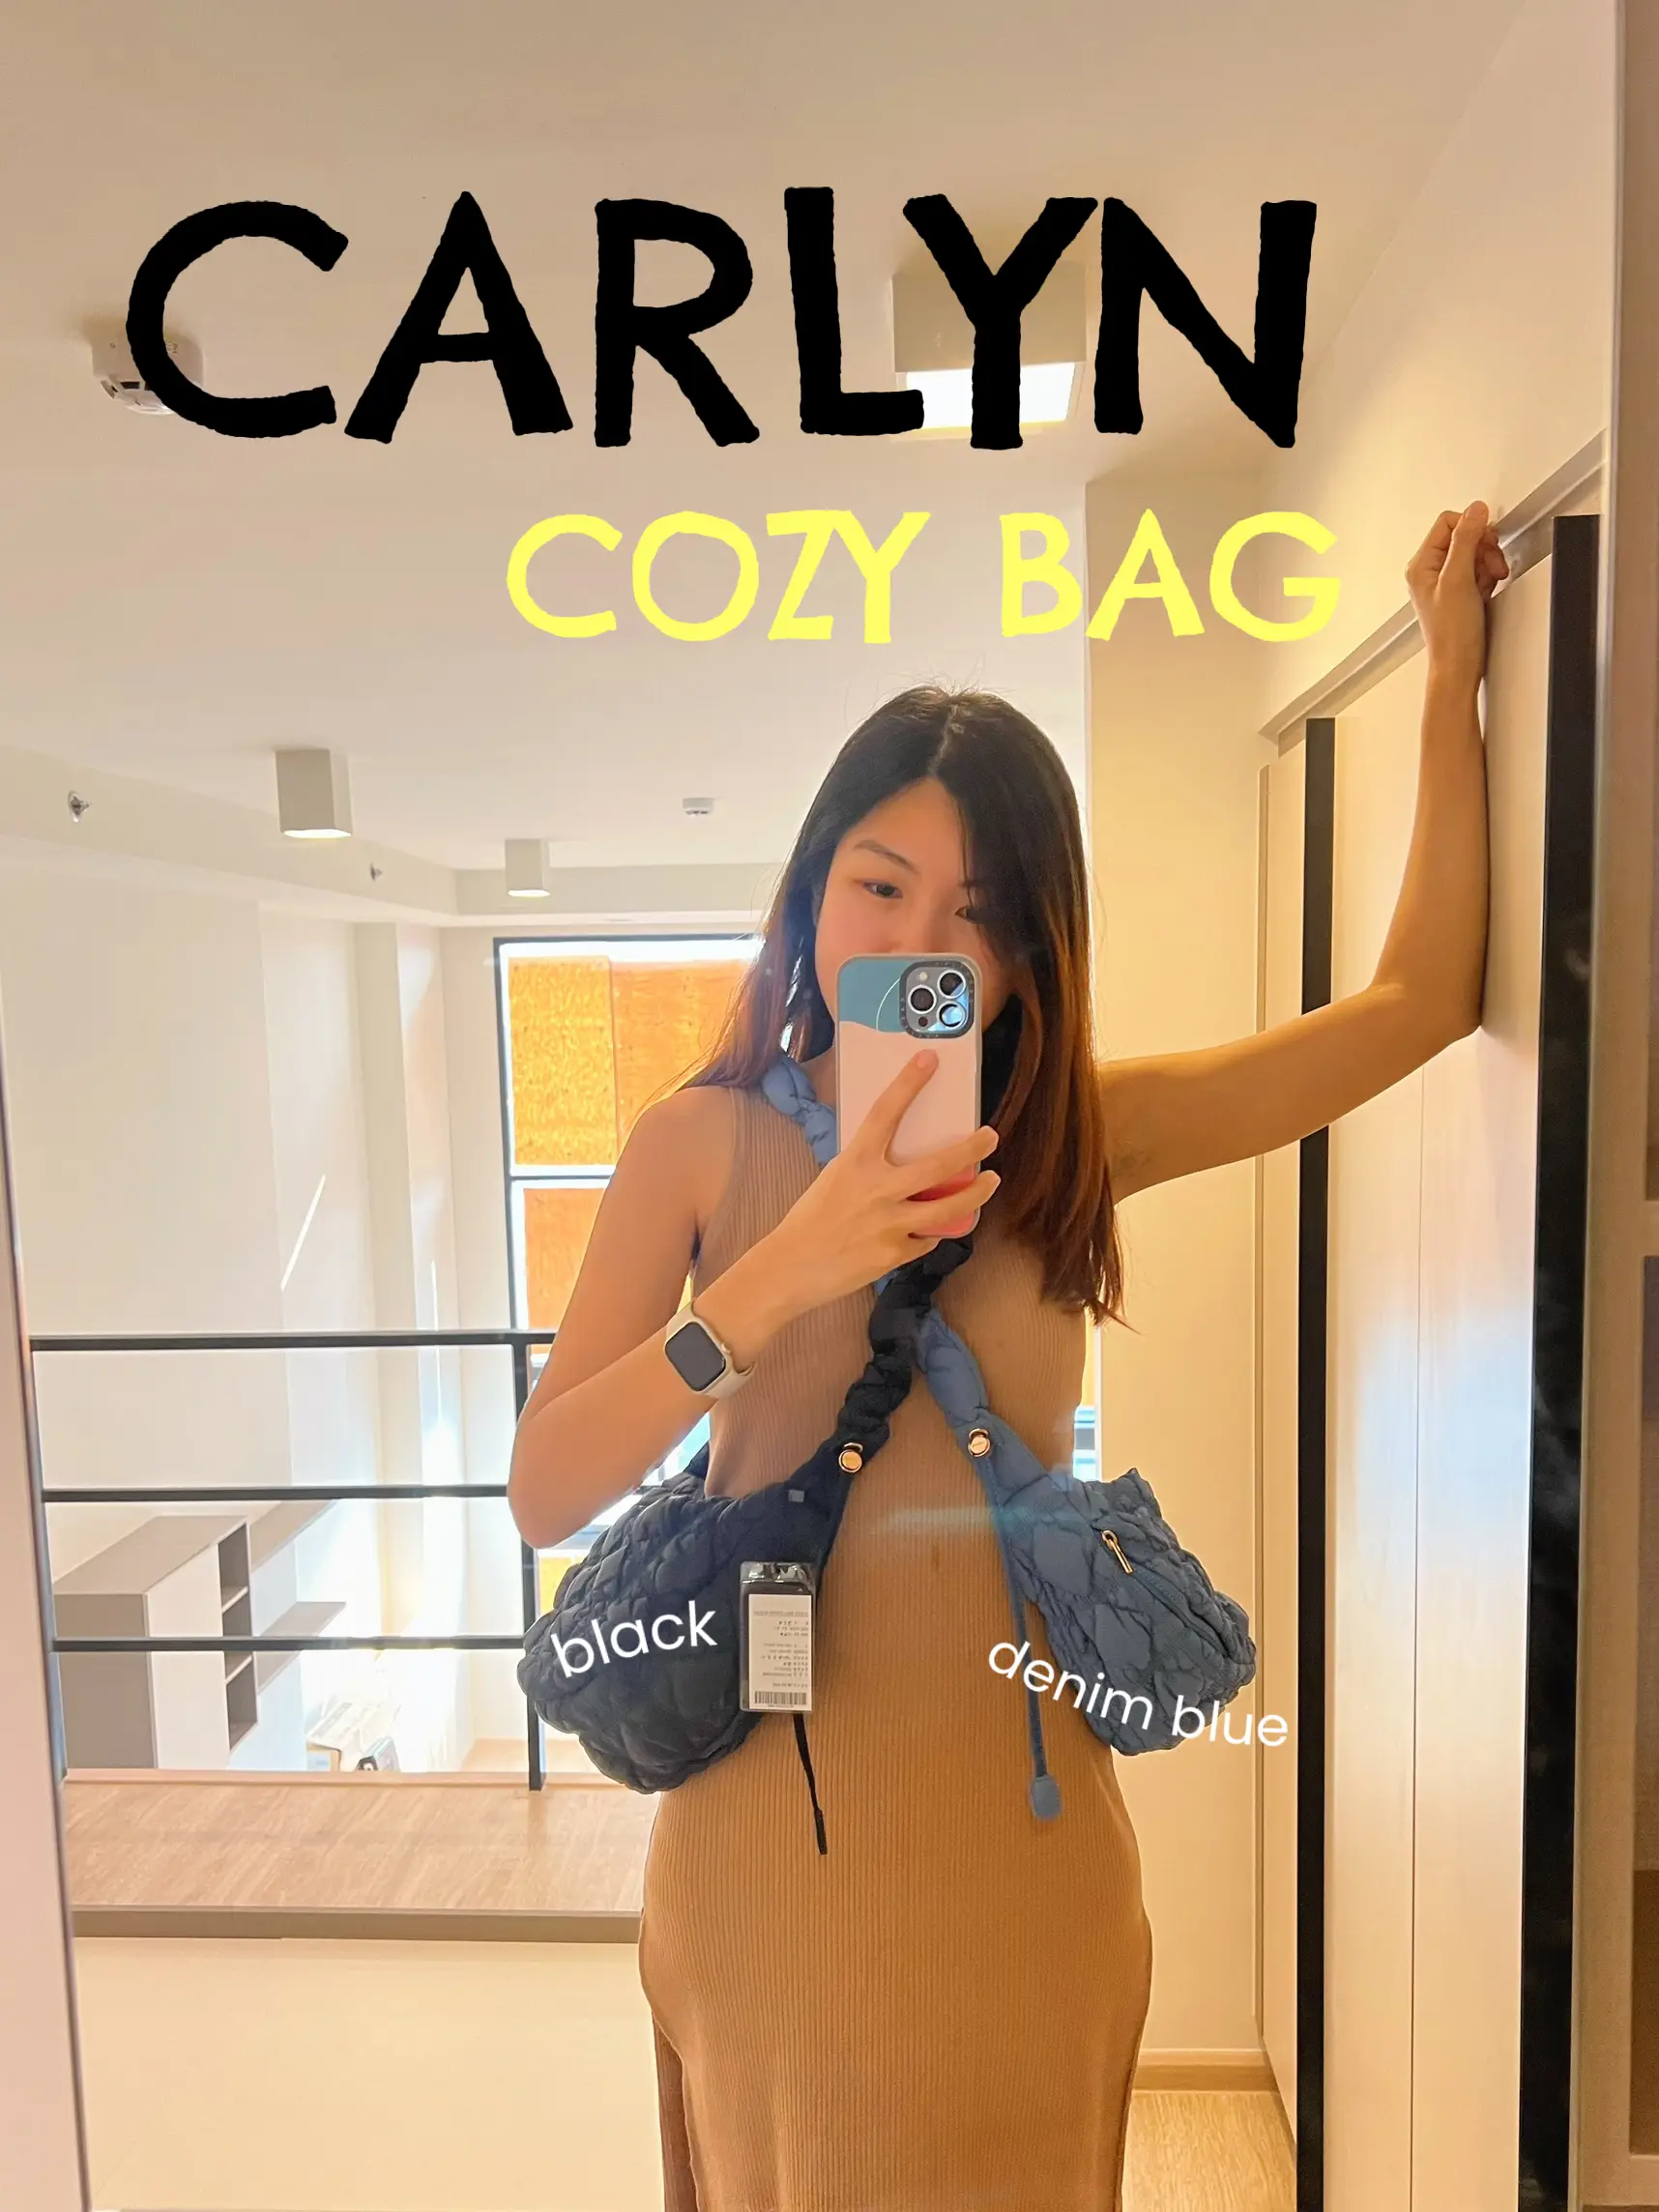 South Korea's Carlyn can be worn on the shoulder or as a crossbody